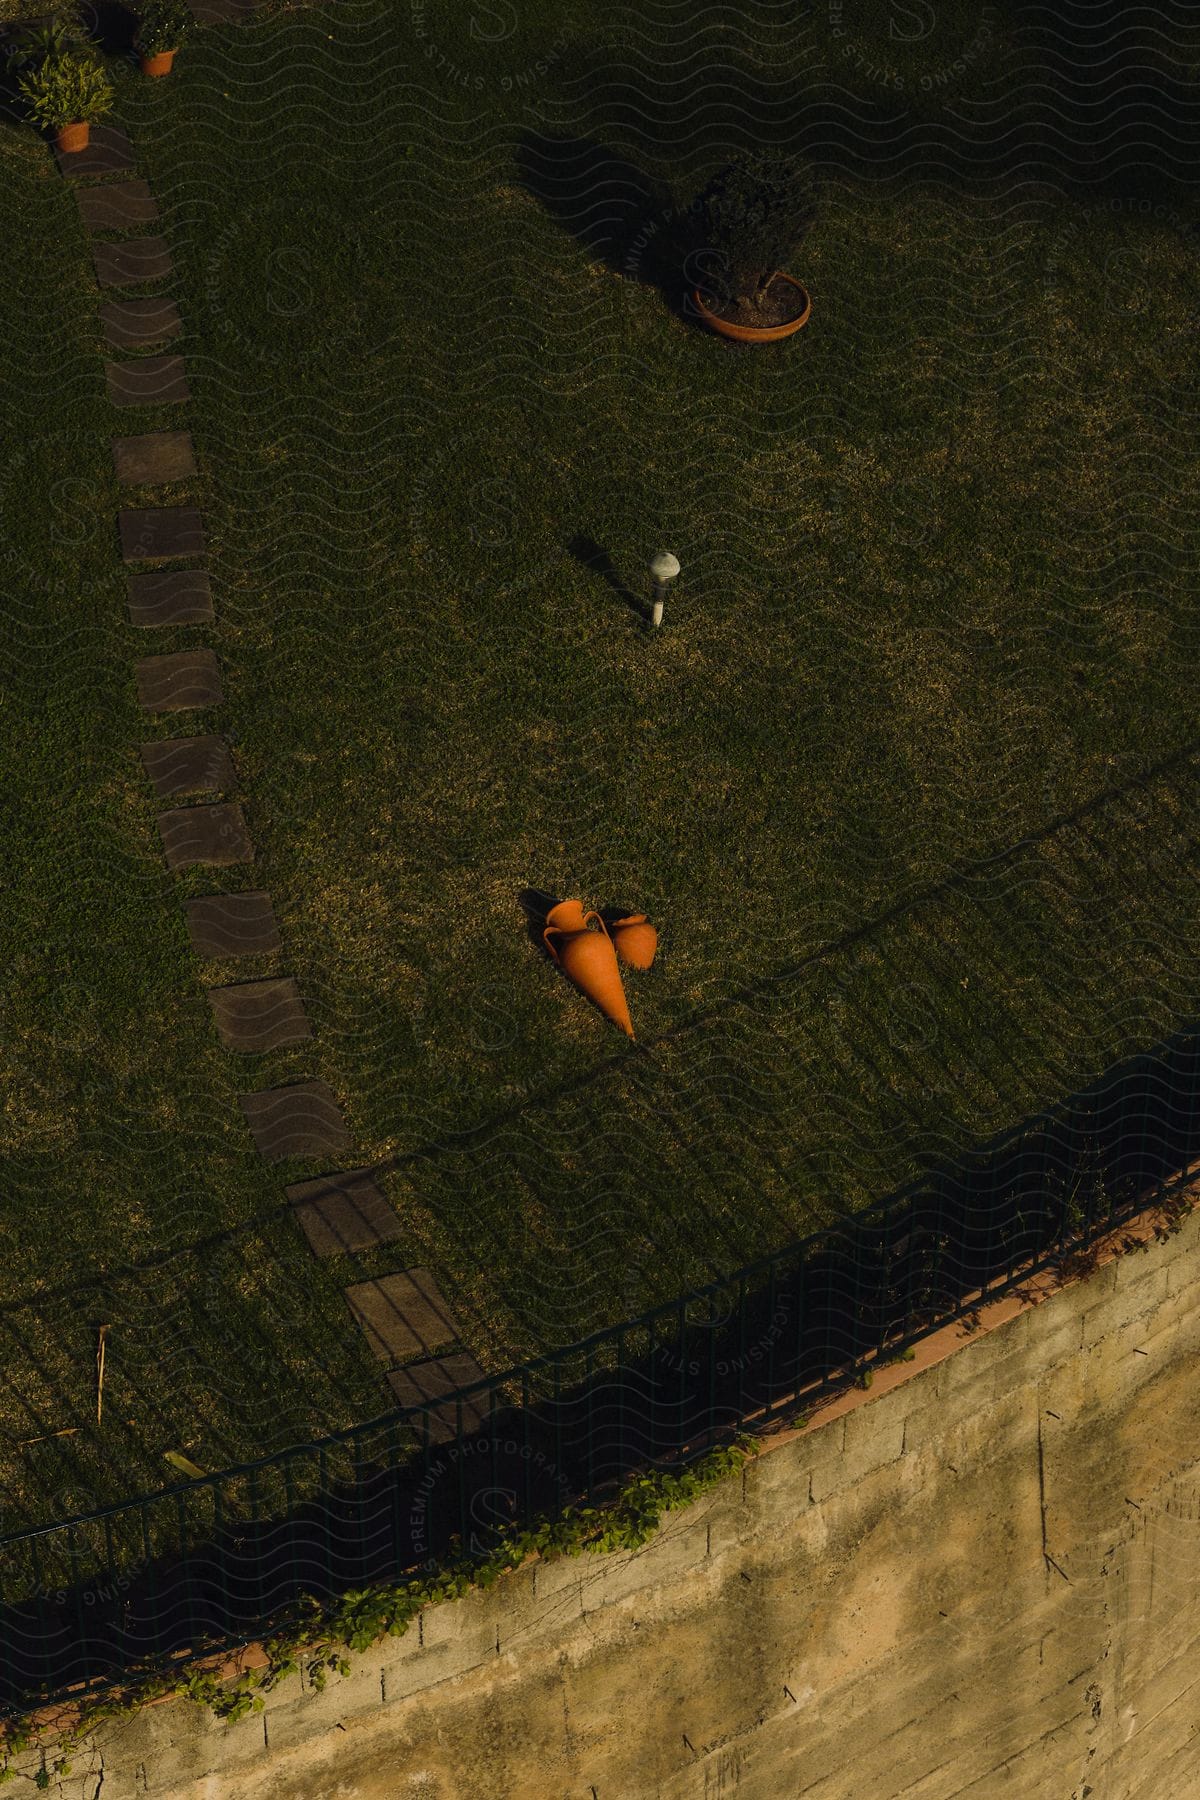 Some items laying on grass in a yard.